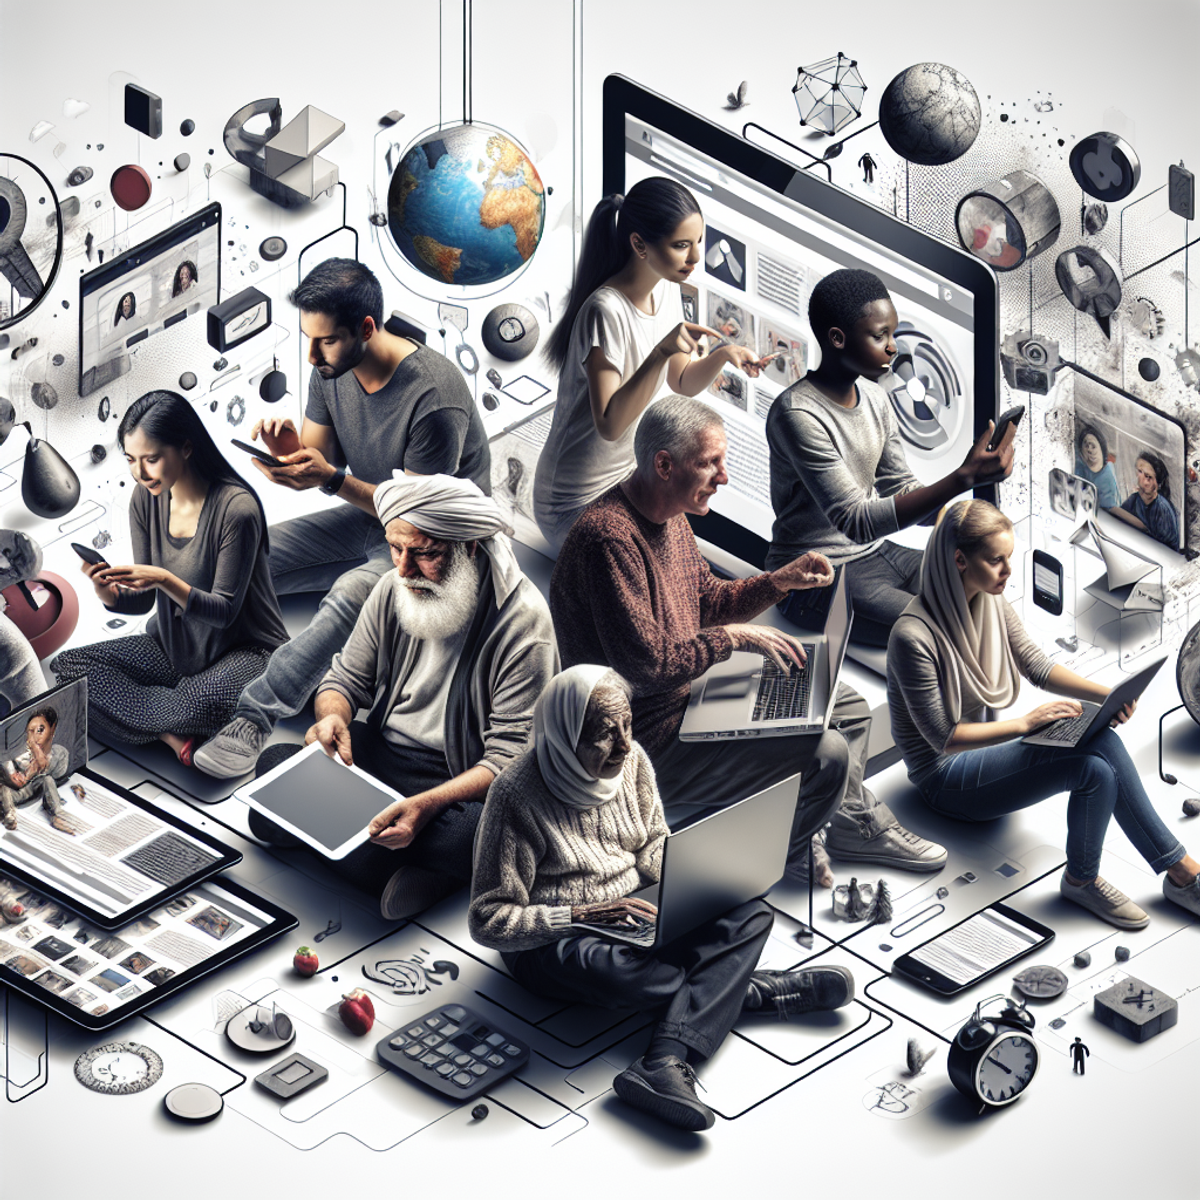 Diverse group of people using various tech devices with abstract shapes and symbols representing the underlying structure of a website.